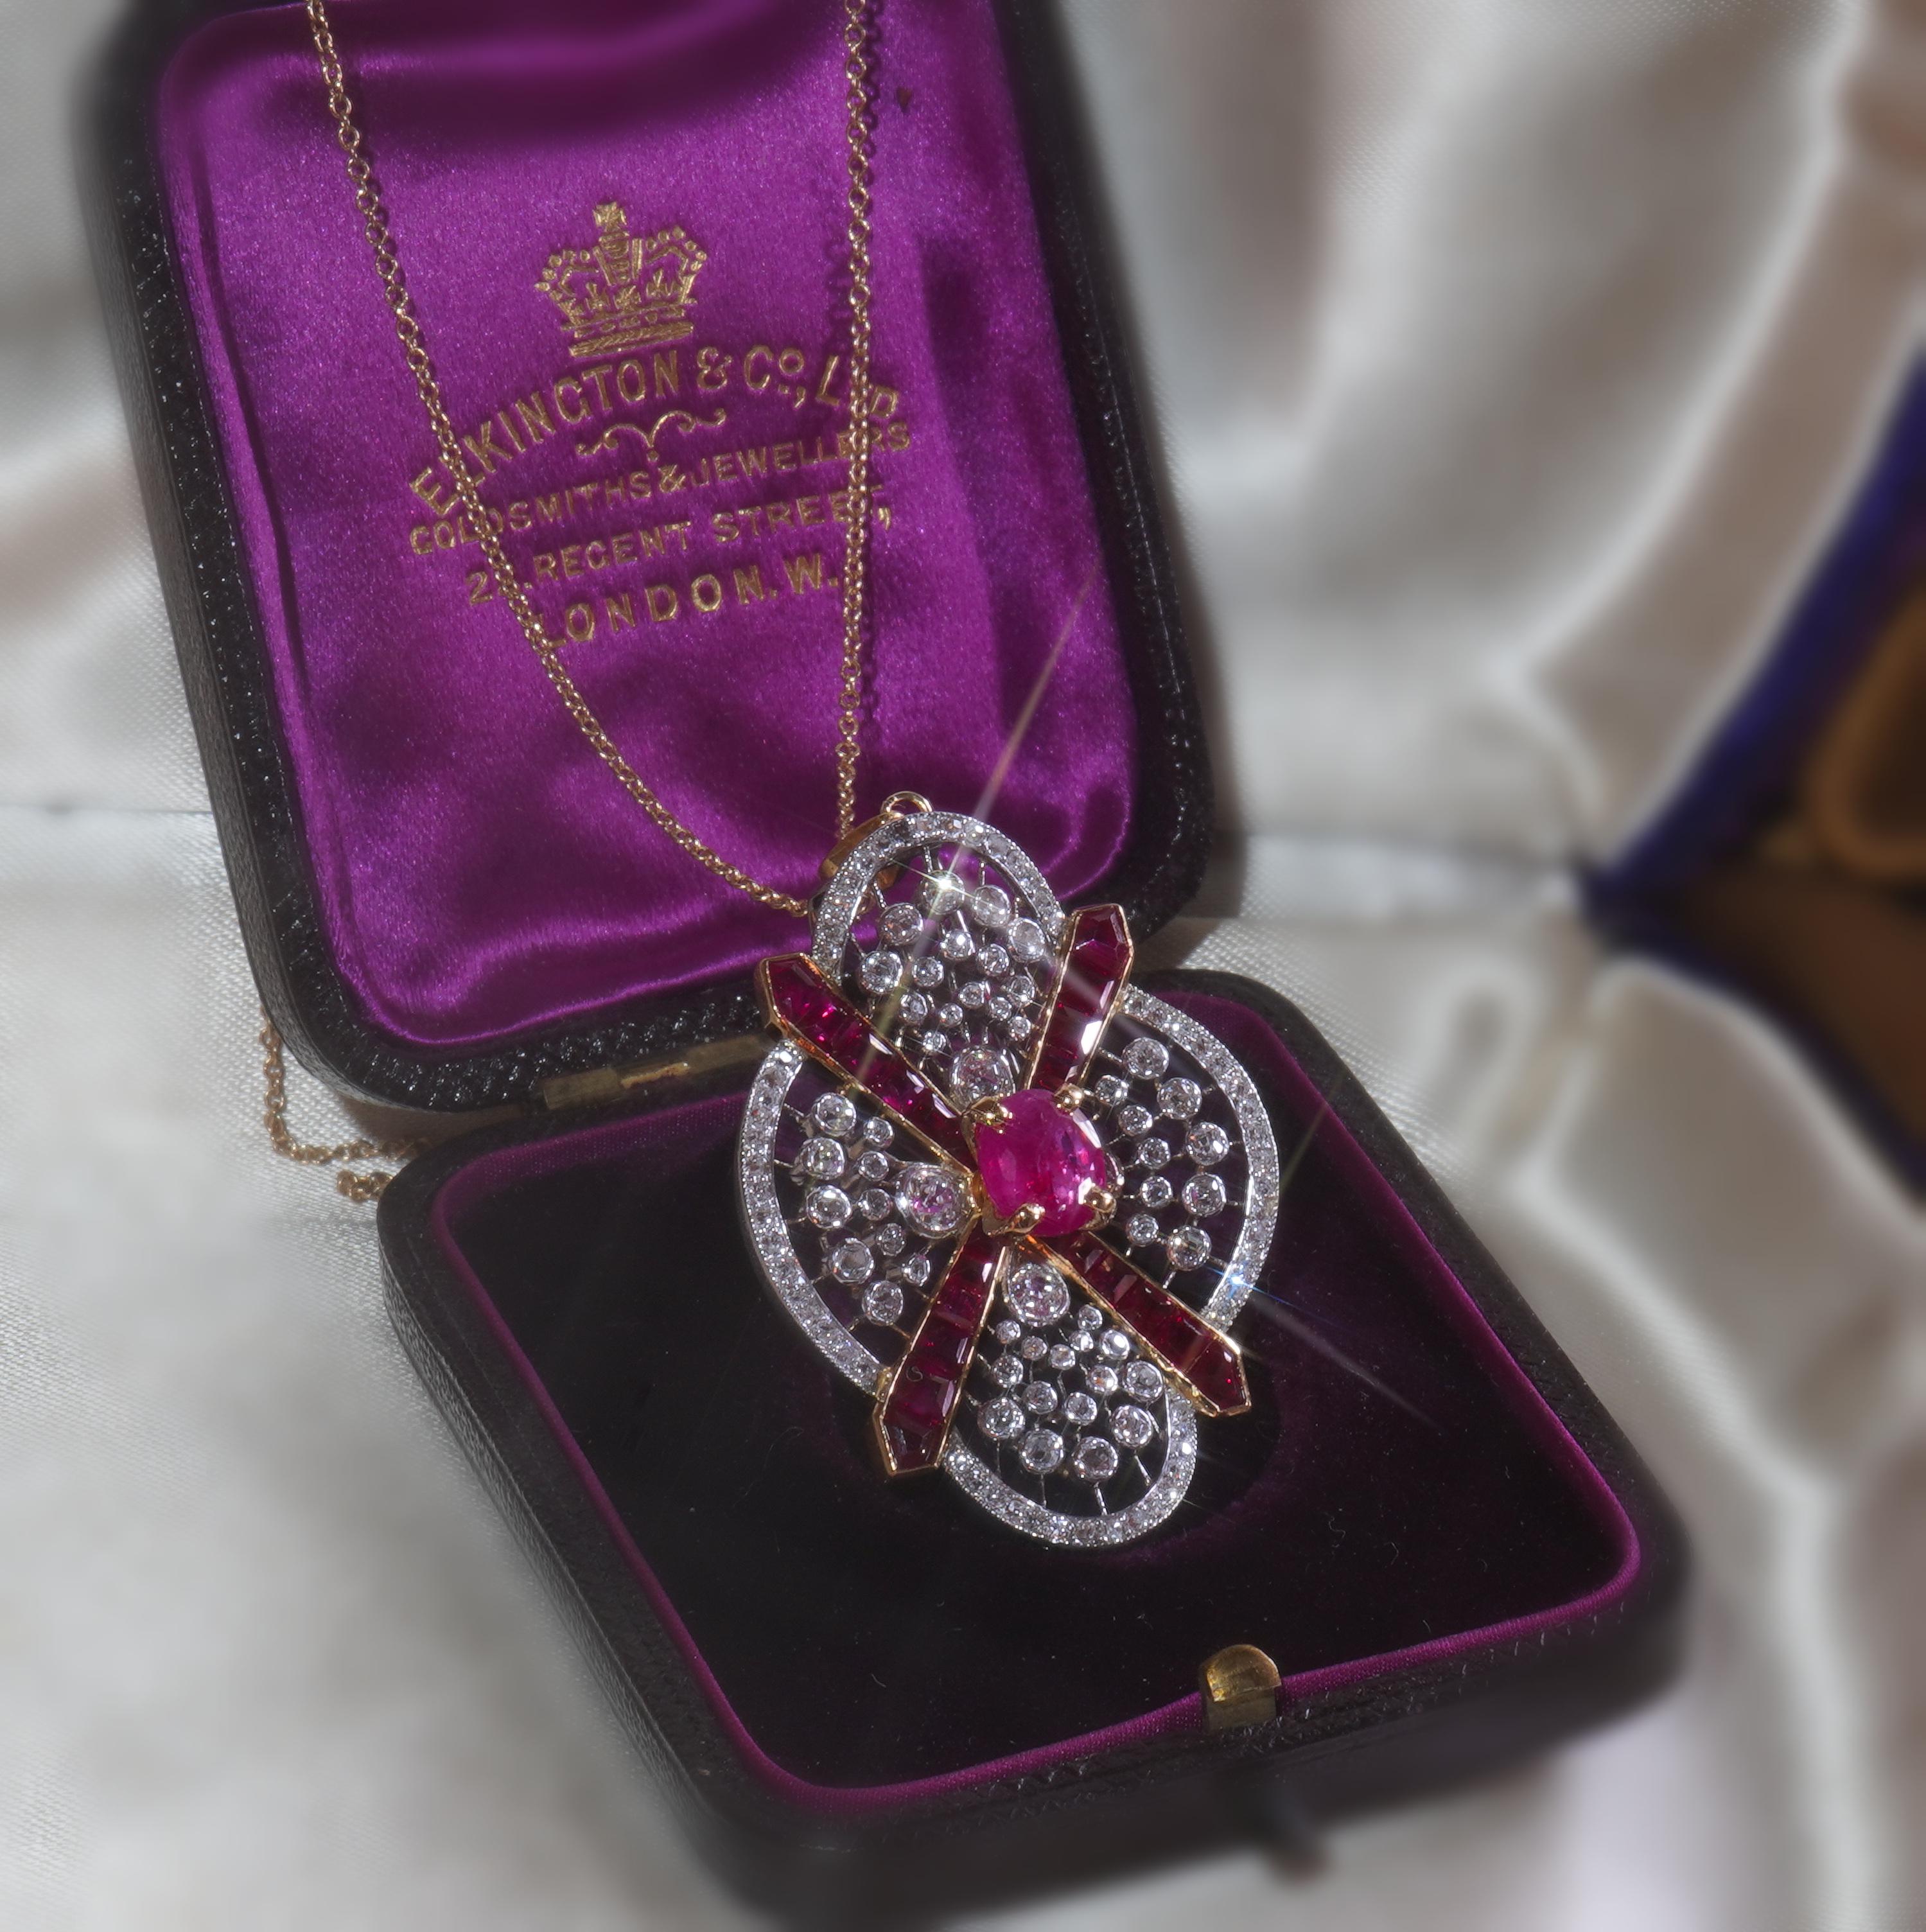 Old South Jewels proudly presents GIA Certified Giant Unheated Red Ruby and Diamond Vintage 4.63 Carat Pendant and Box! Transparent Natural Burma Rubies Set in Solid Heavy Platinum & 18K Yellow Gold.

Breathtaking Brilliant Rich Red Transparent